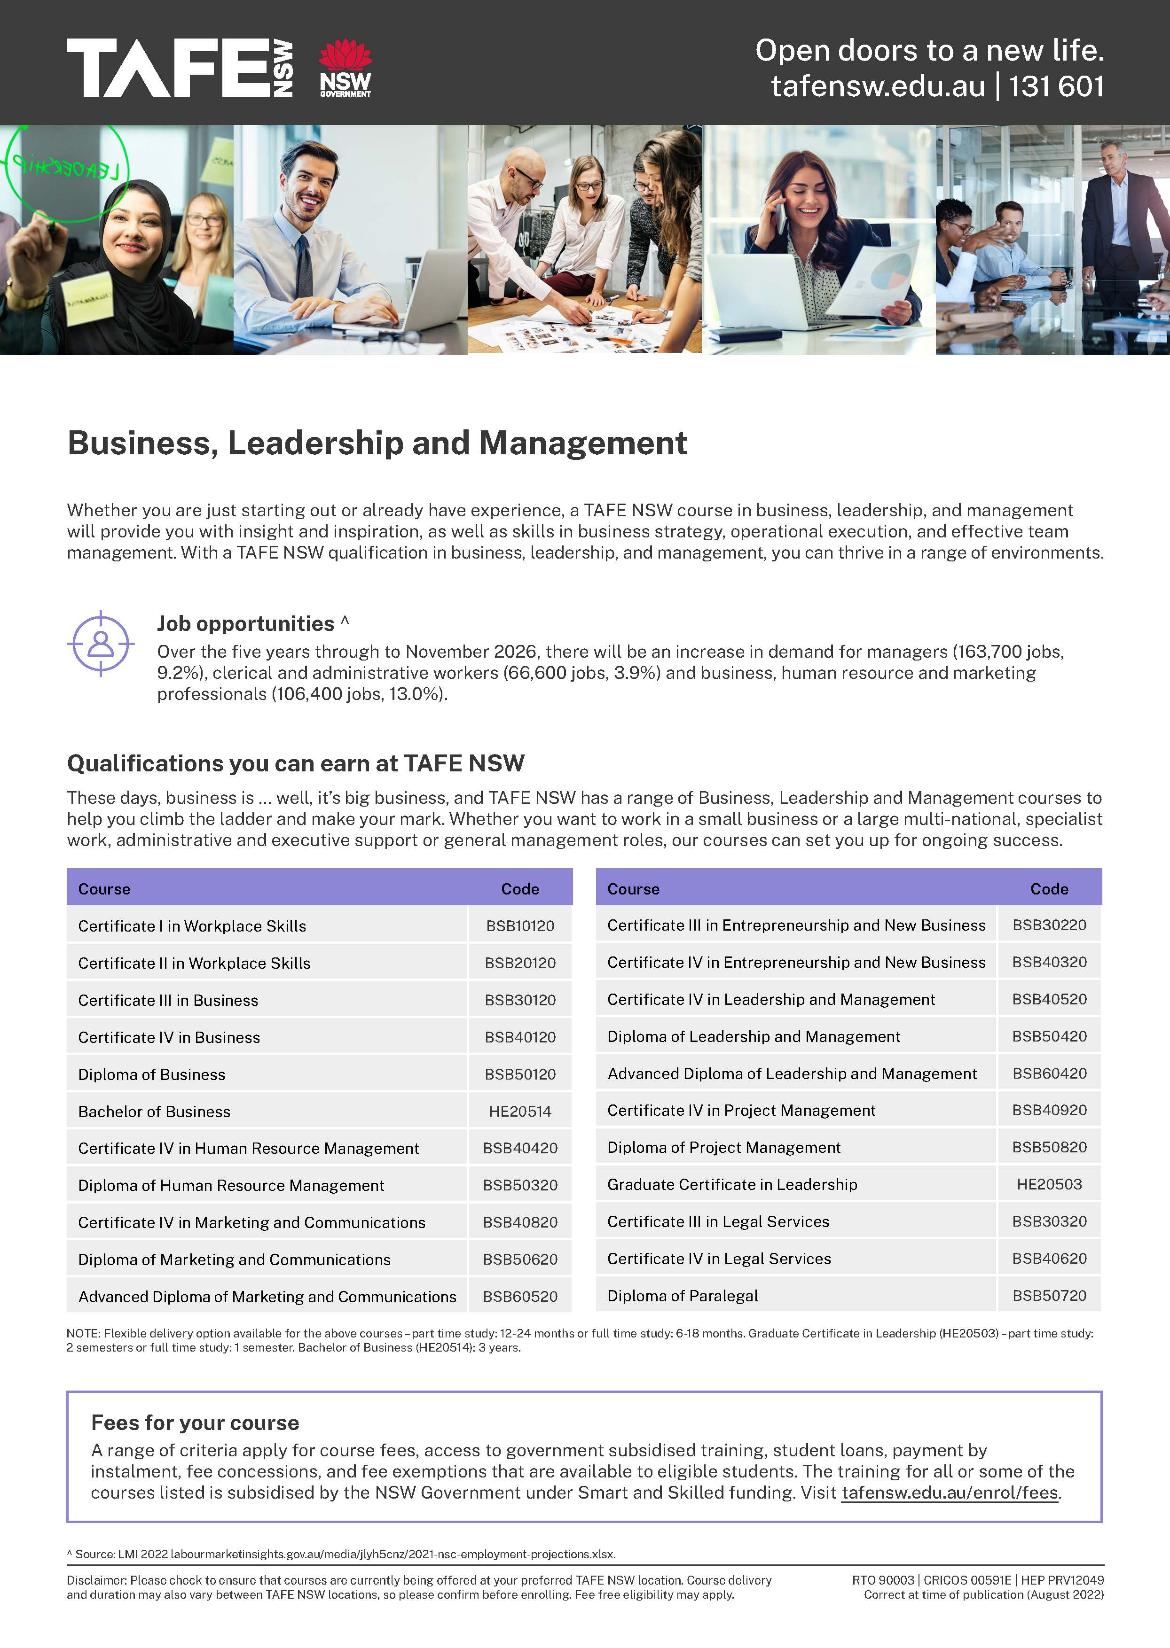 Business Leadership and Management